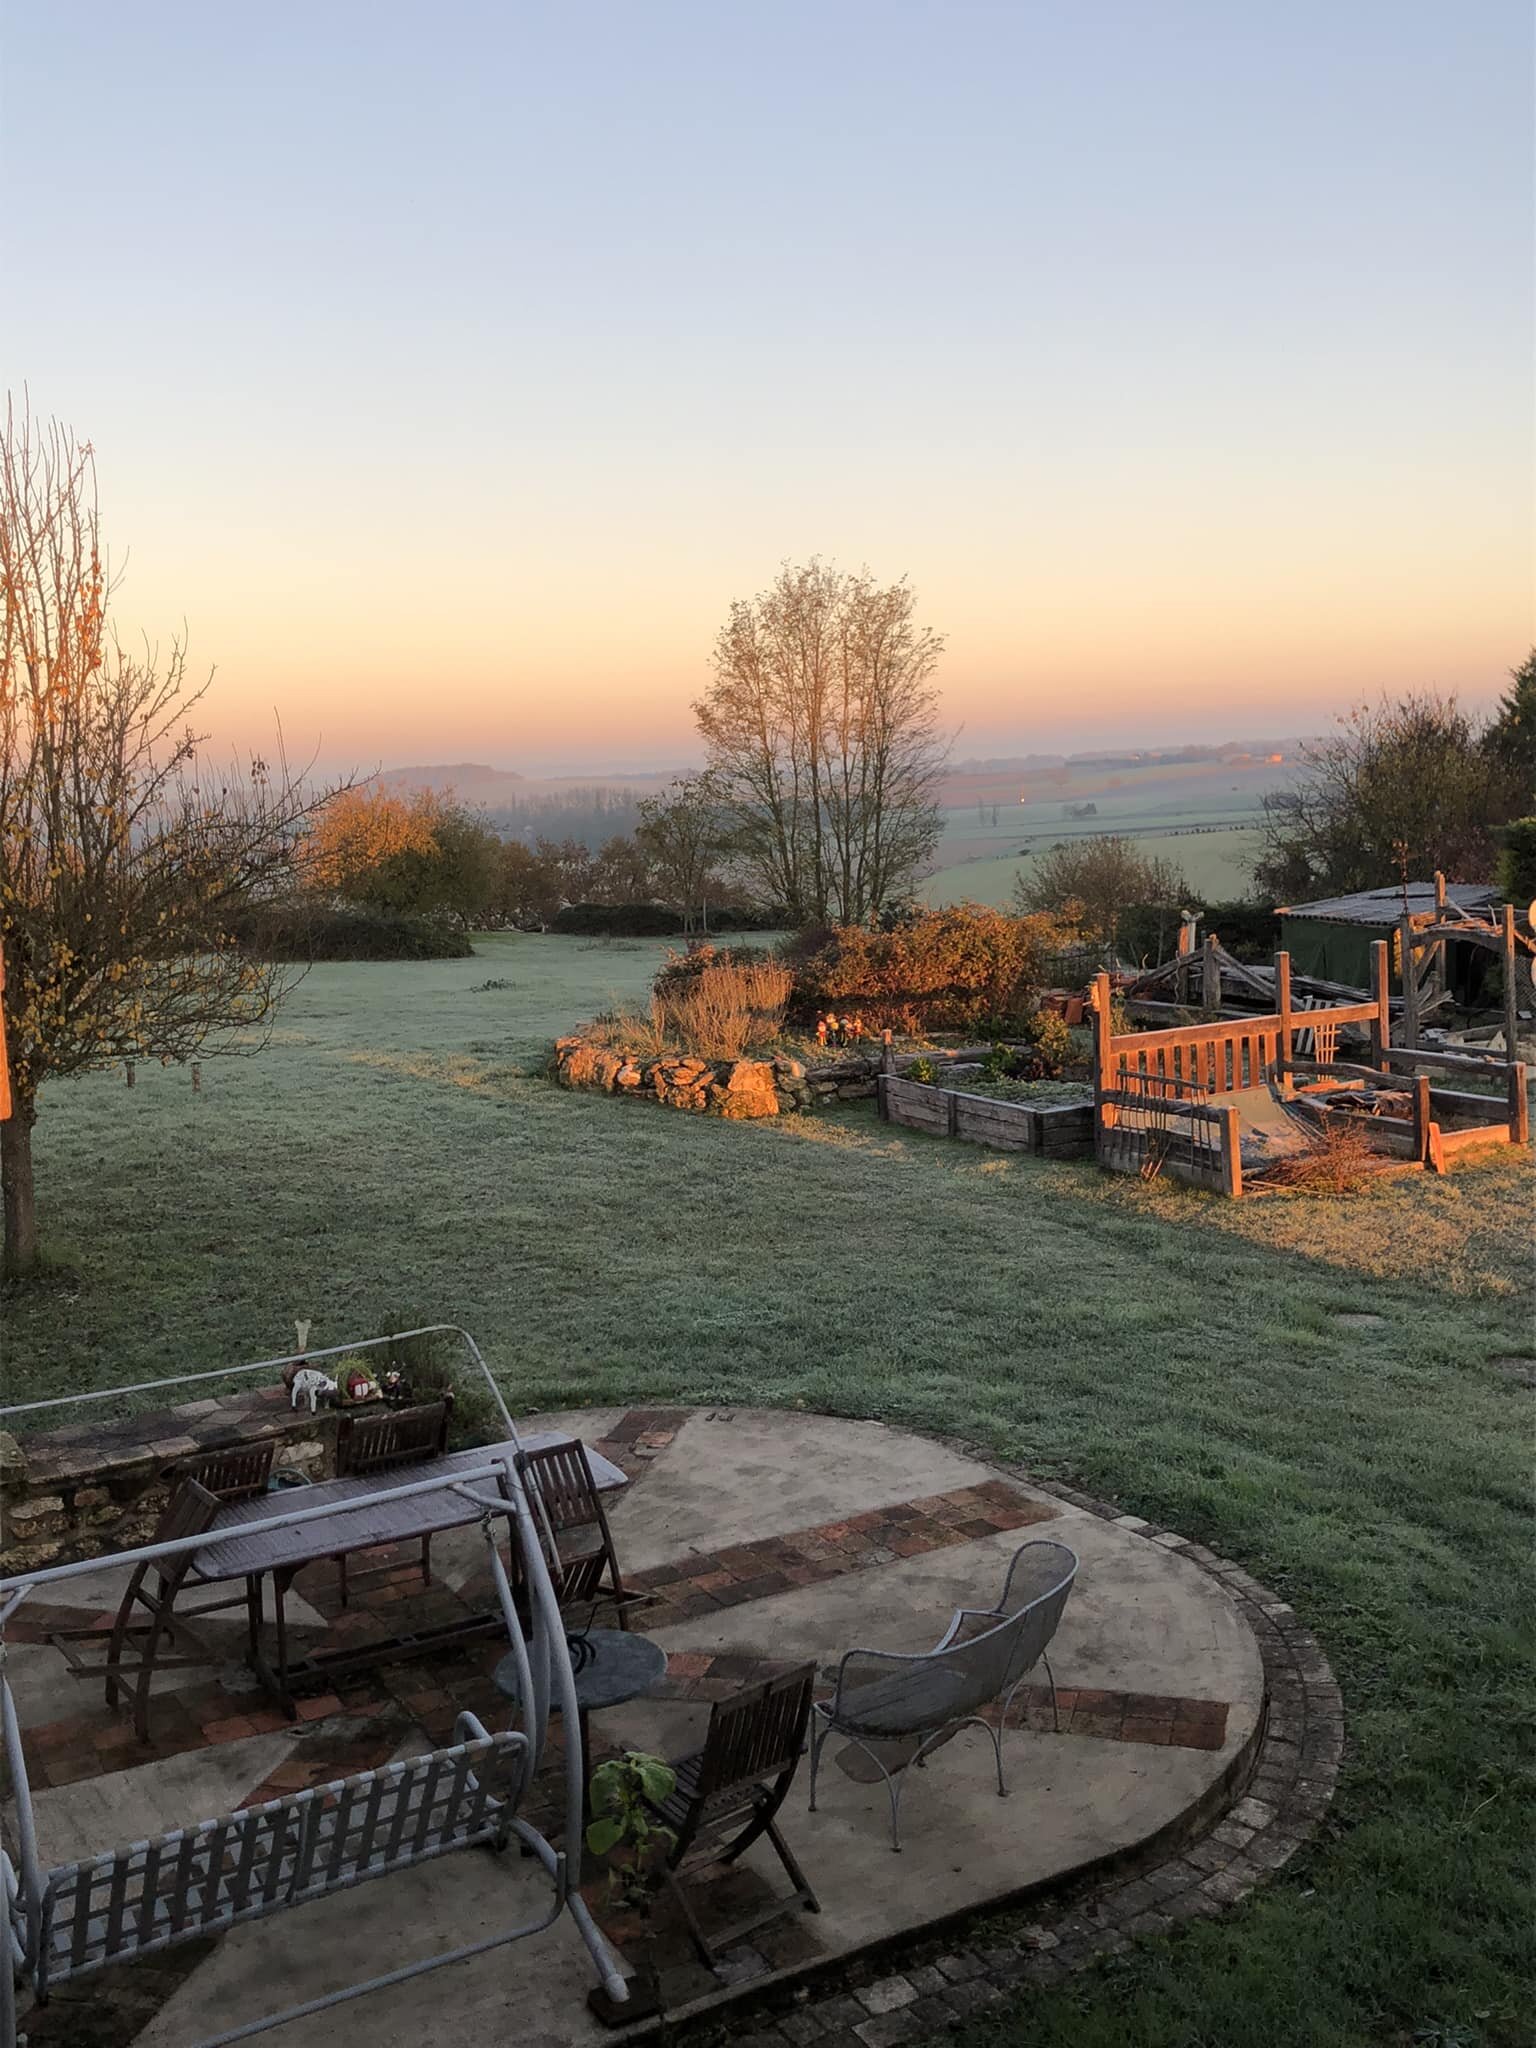 What a beautiful, crispy morning in SW France. It&rsquo;s starting to feel a lot like Christmas&hellip;.

Sending you all a bright and sunny Monday vibe xx